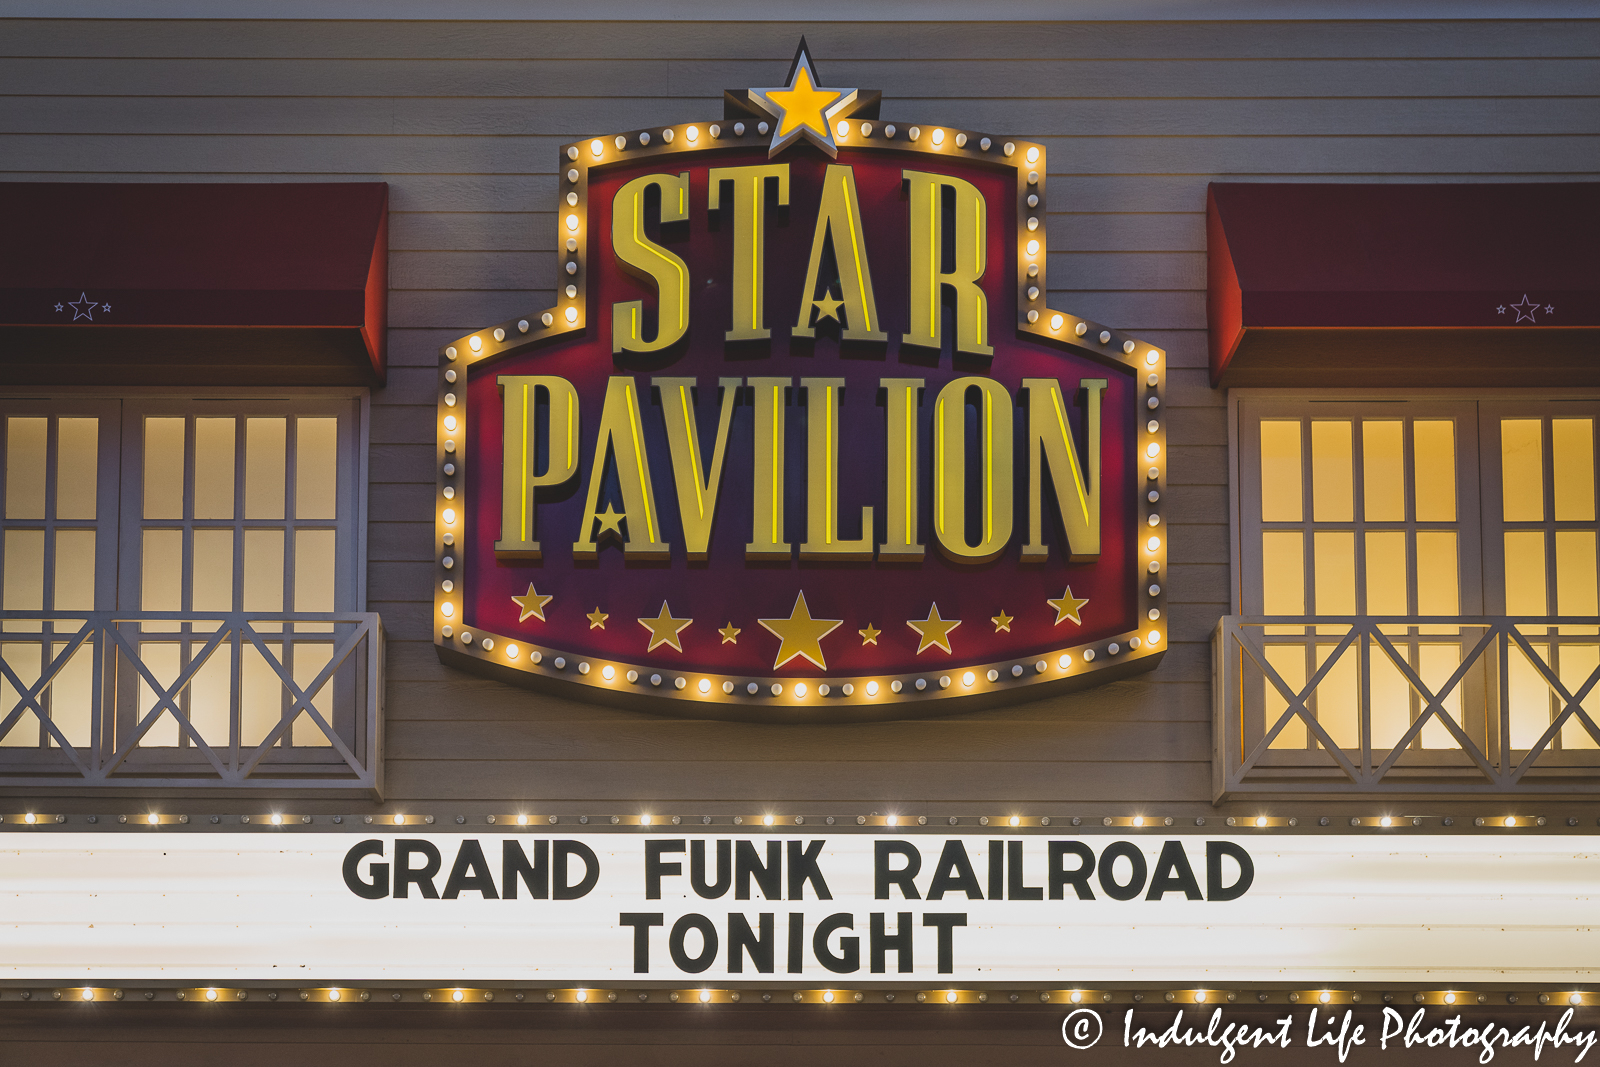 Star Pavilion marquee at Ameristar Casino in Kansas City, MO featuring Grand Funk Railroad on September 18, 2021.